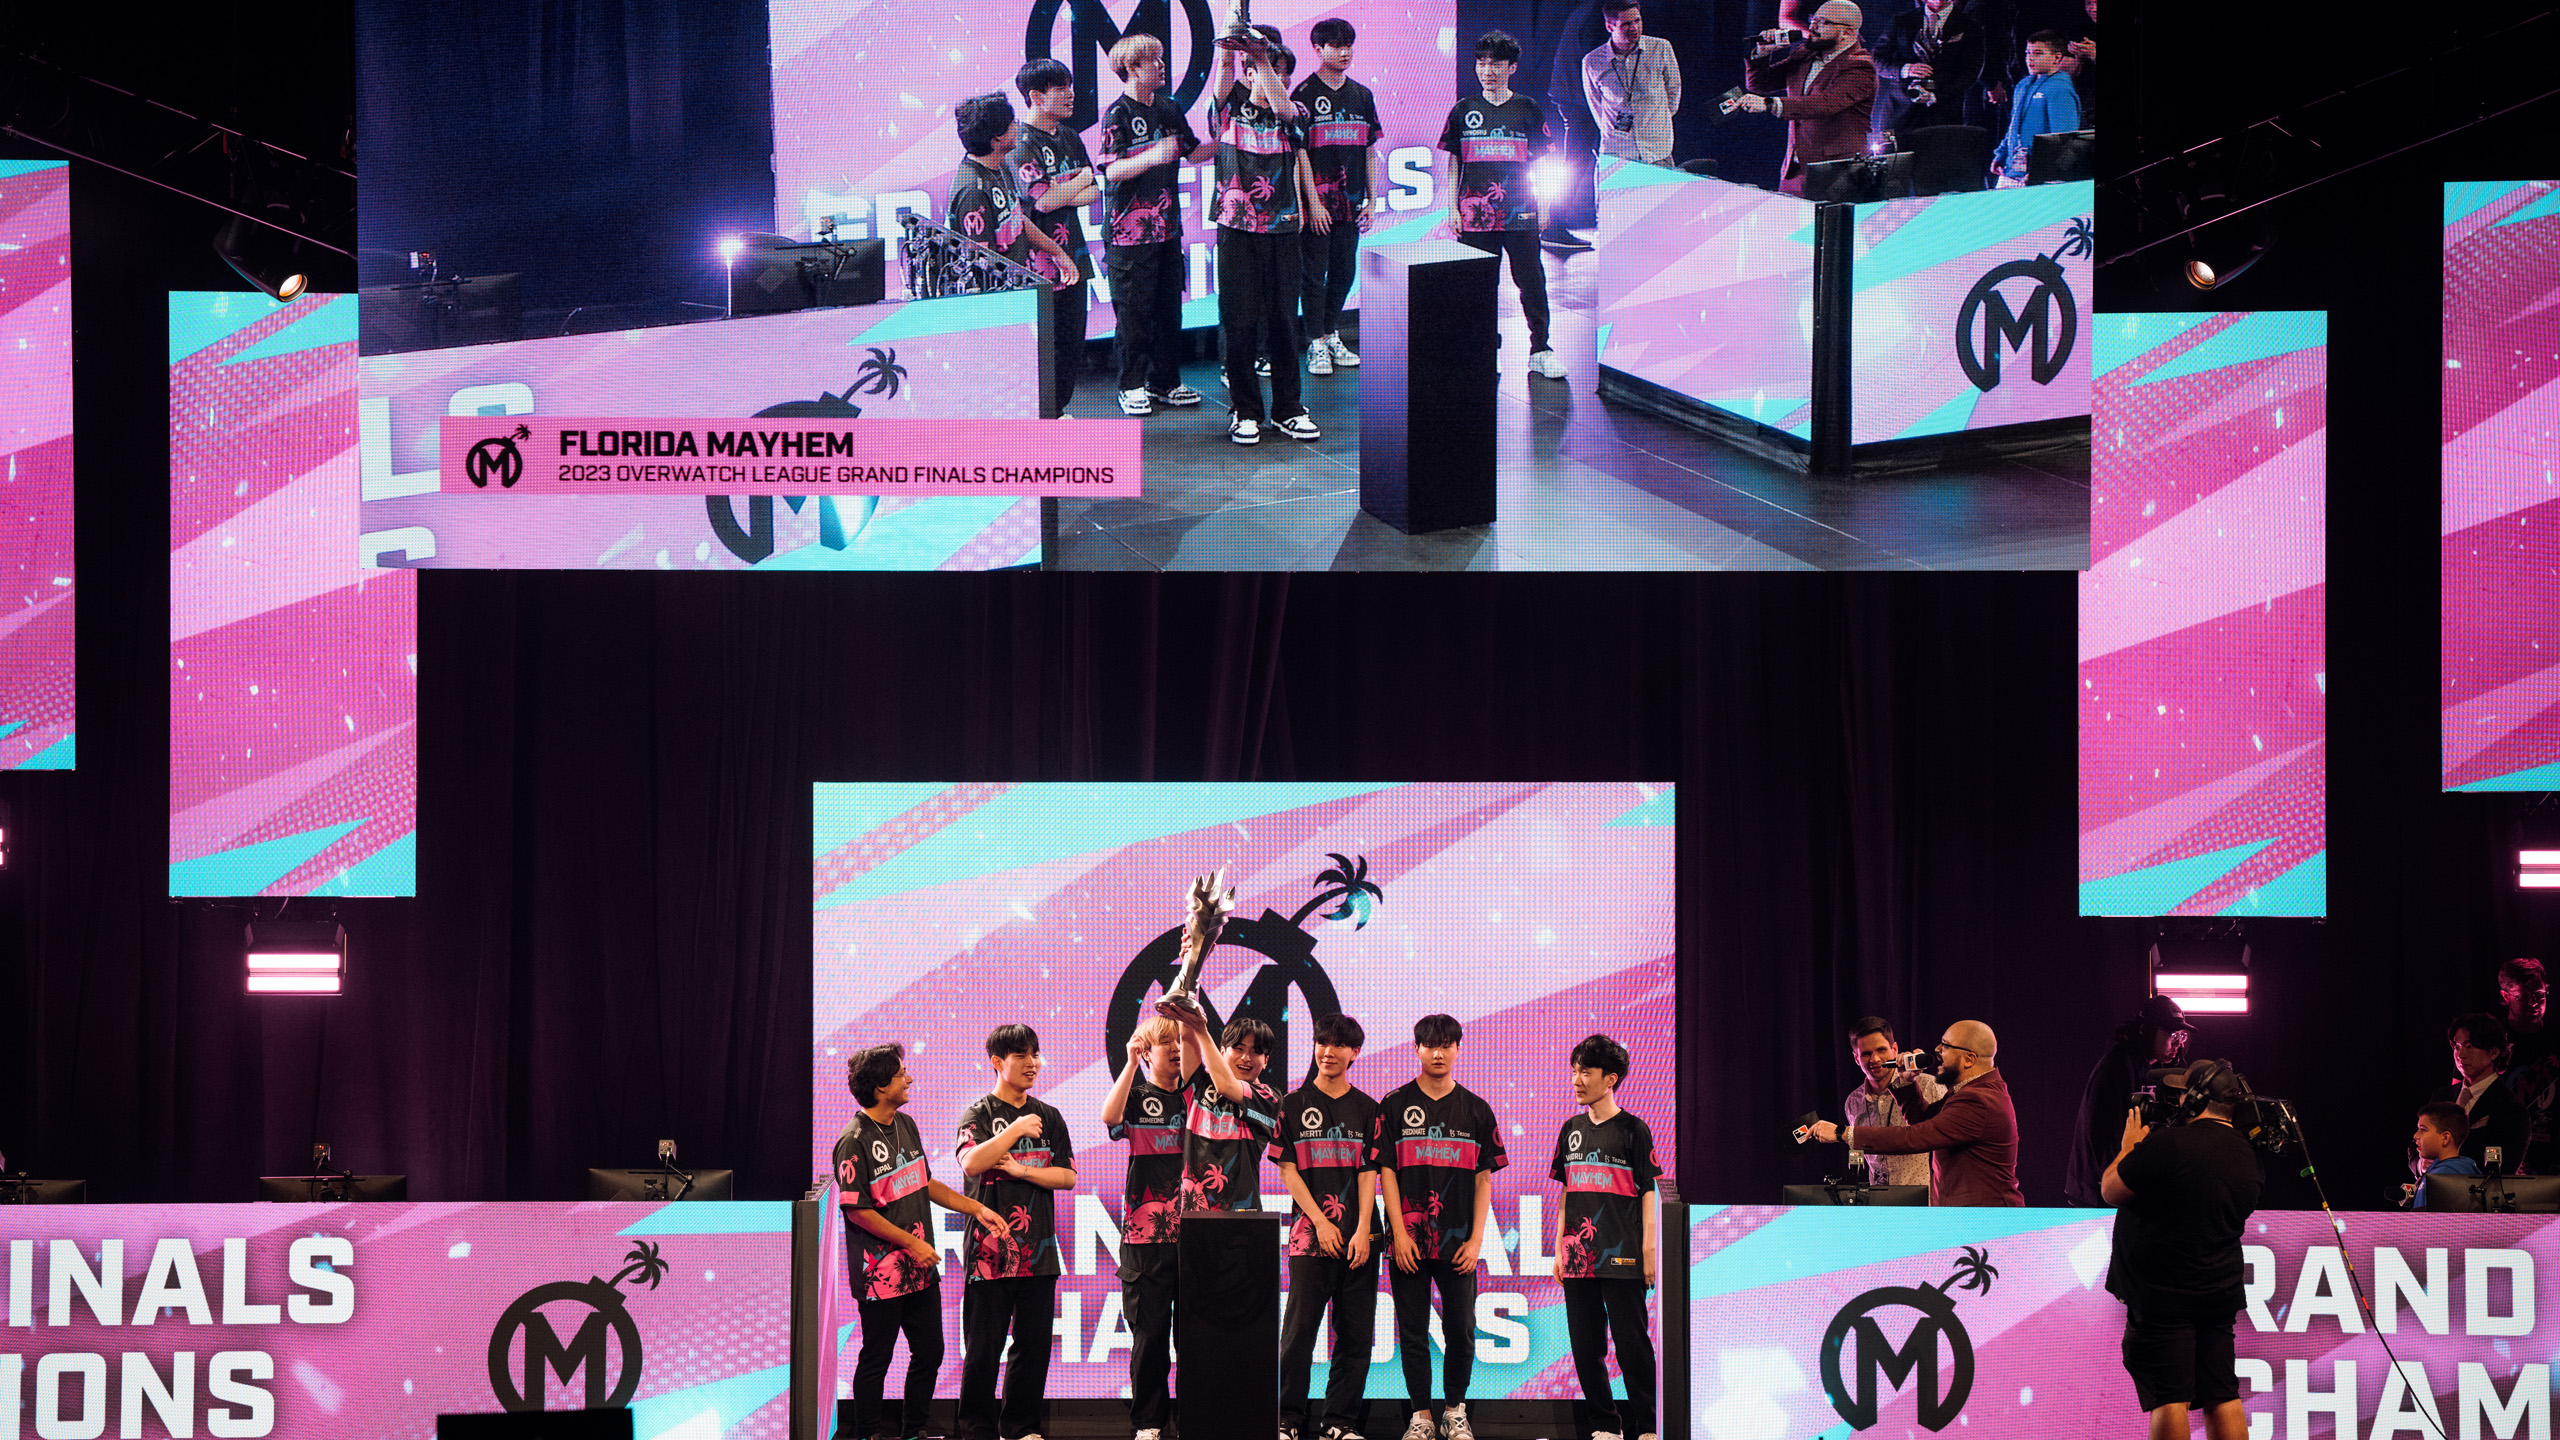 The Florida Mayhem hold the Overwatch League Grand Finals trophy on stage